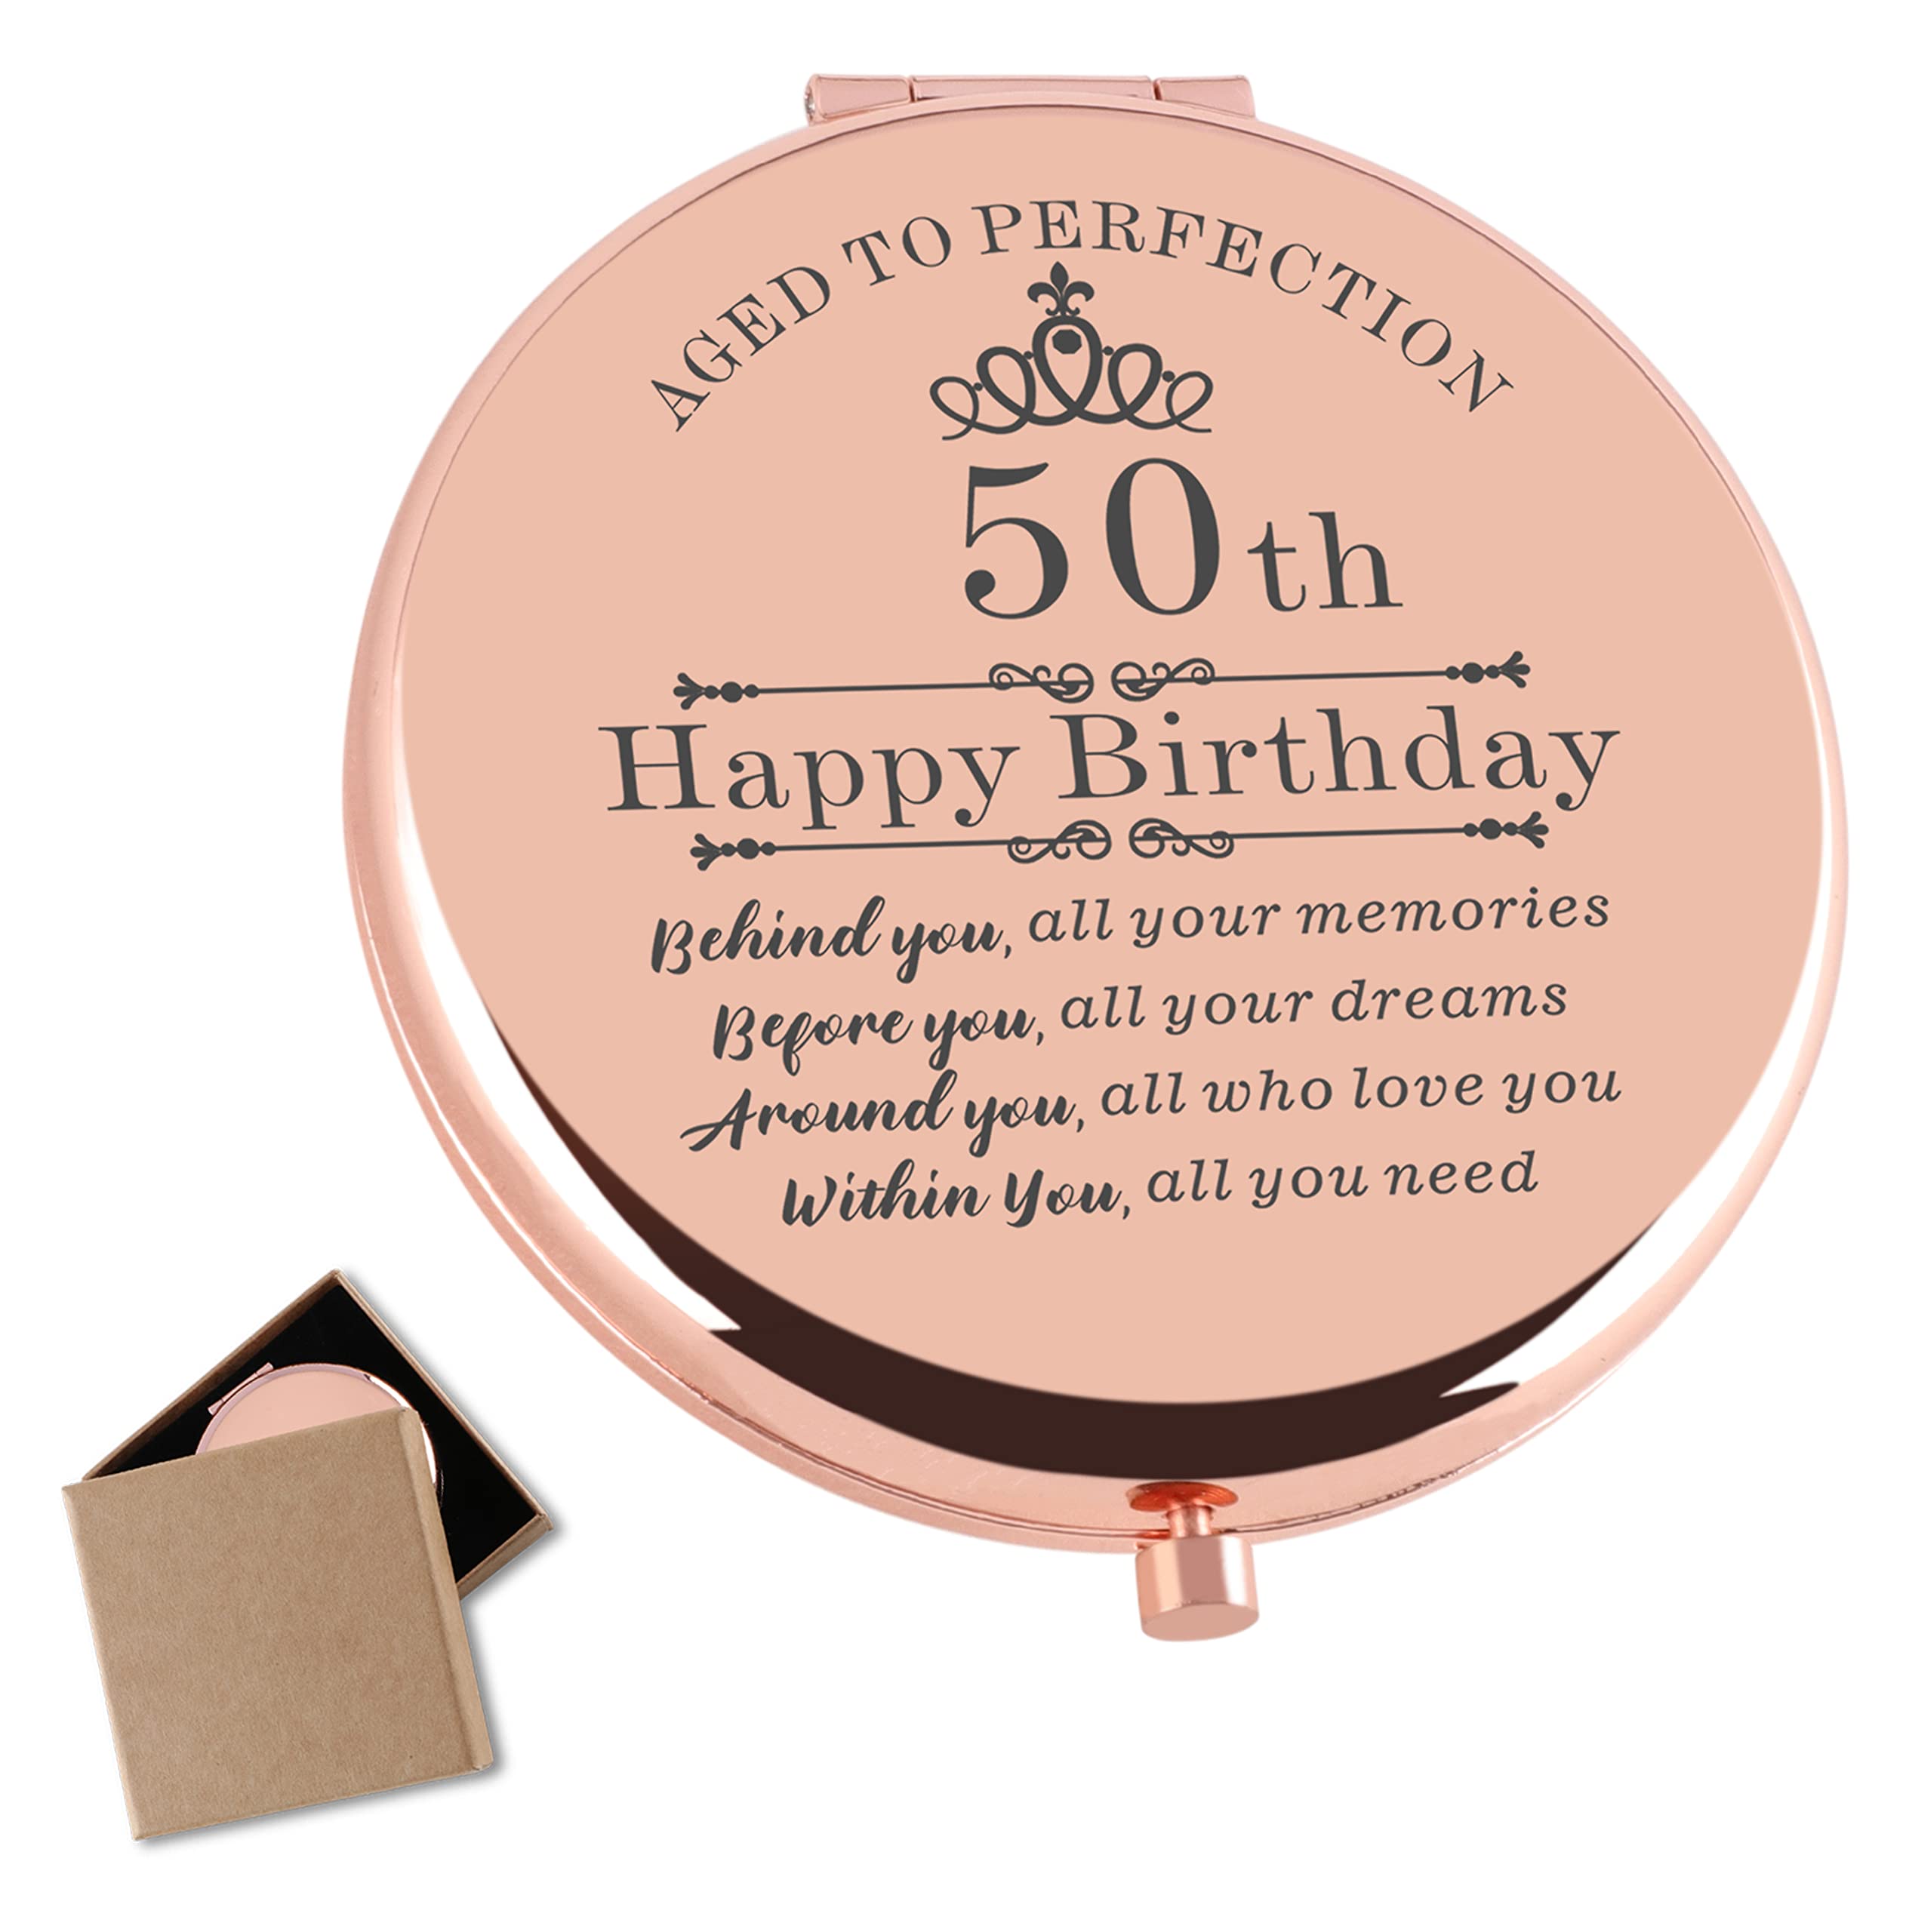 Cawnefil 50th Birthday Gifts for Women Rose Gold Compact Makeup